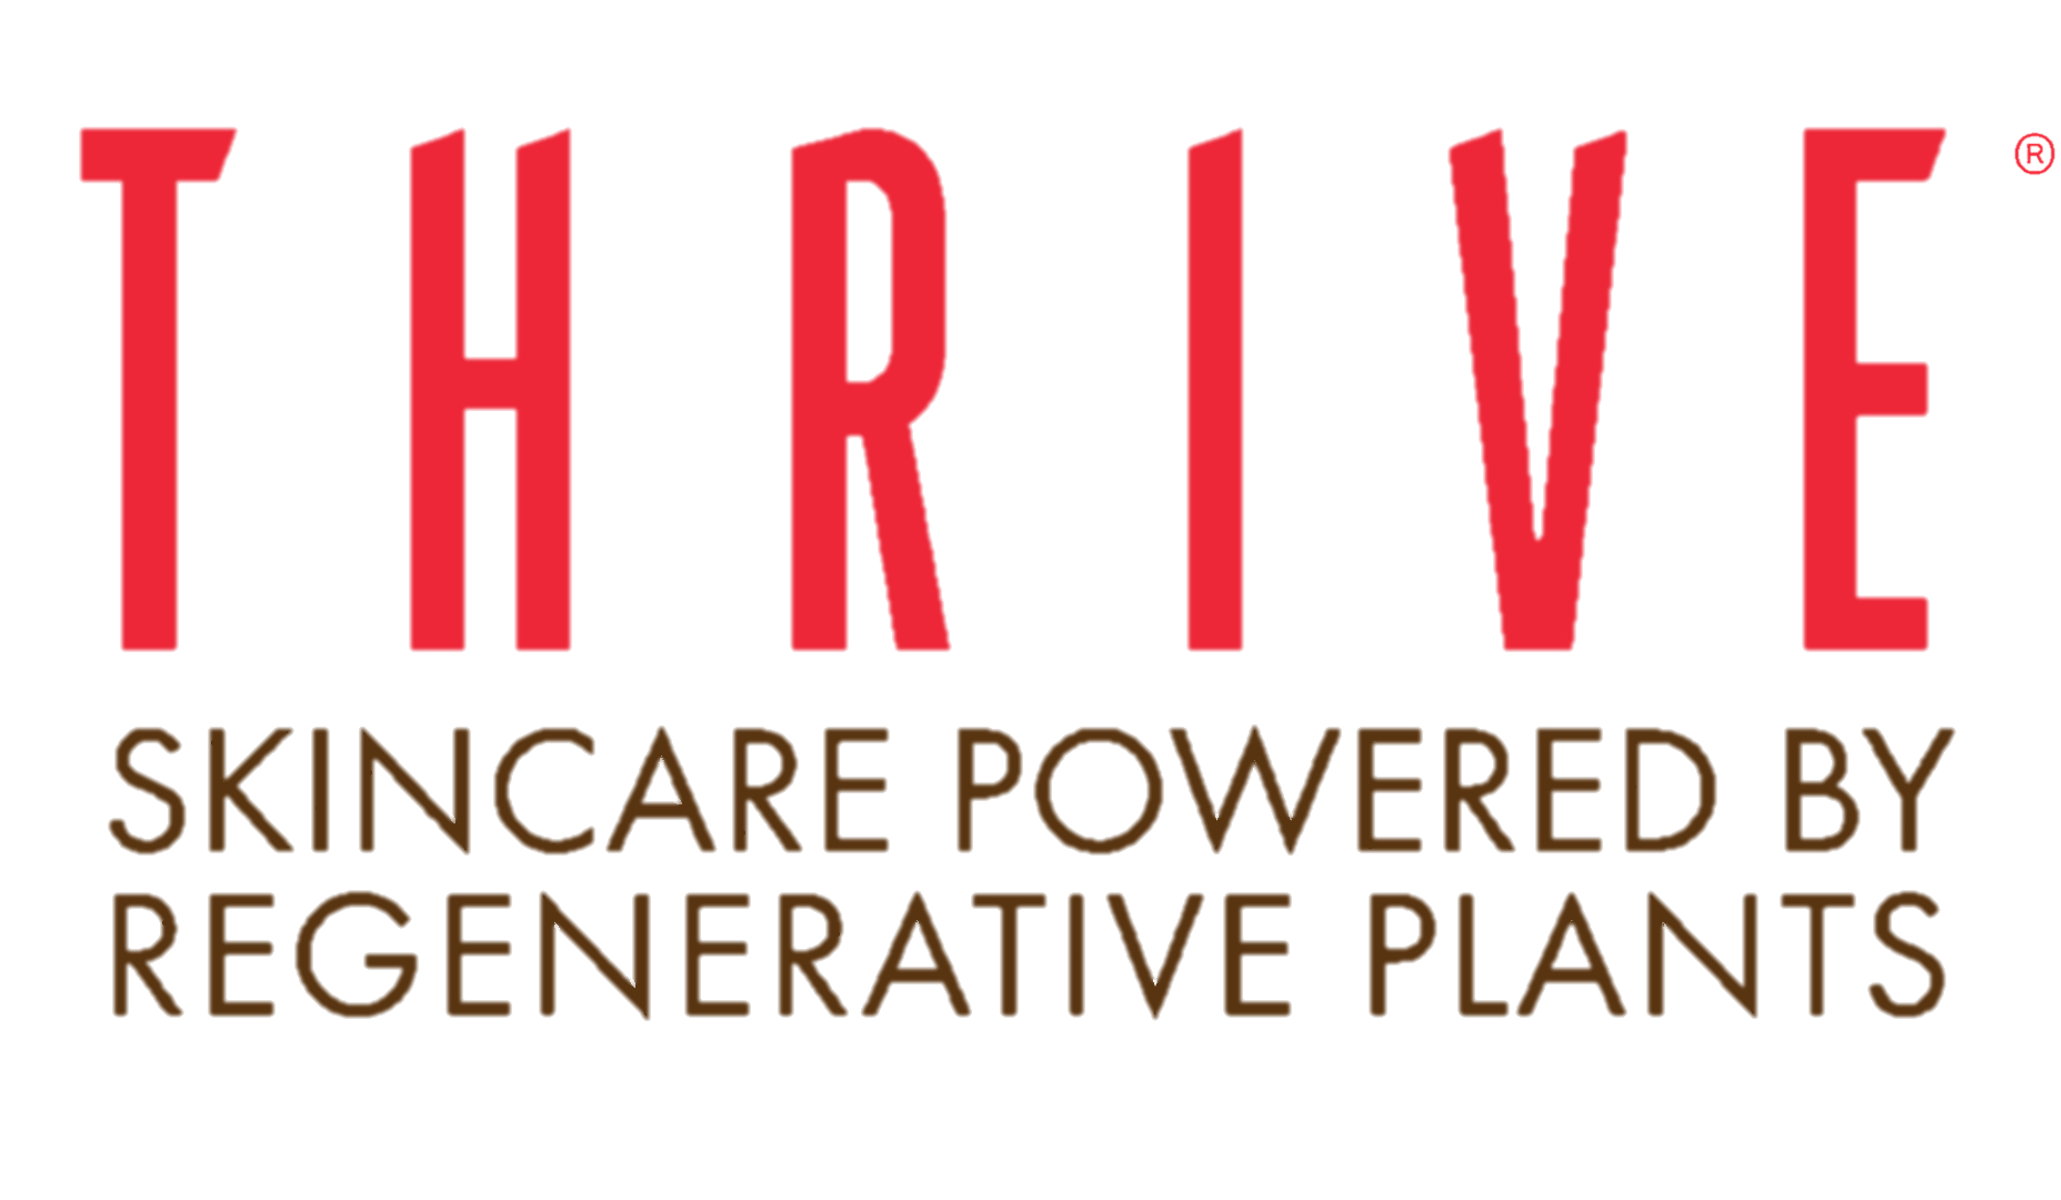 Thrive Natural Care